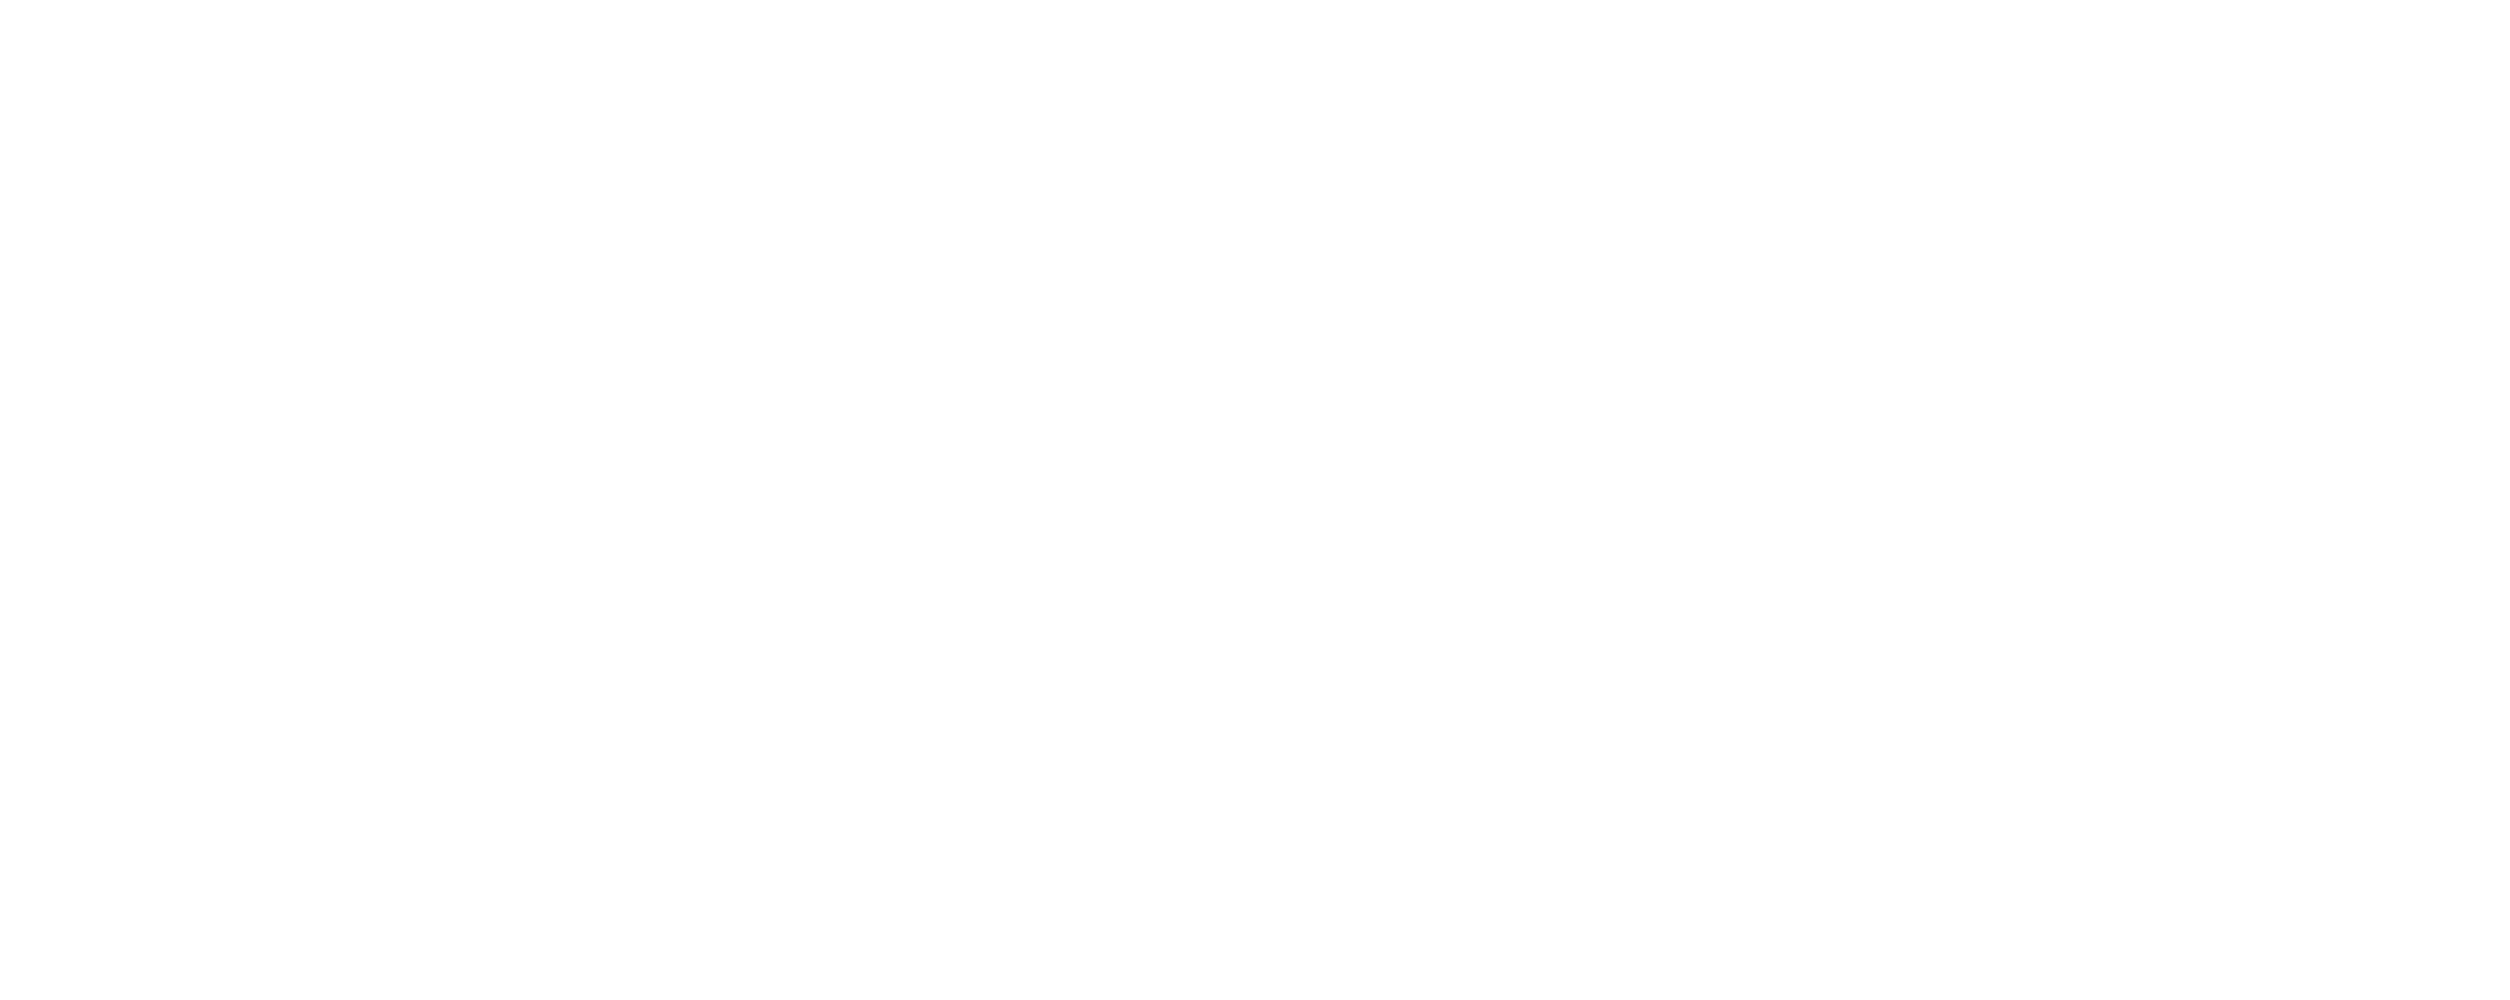 Eric Barch